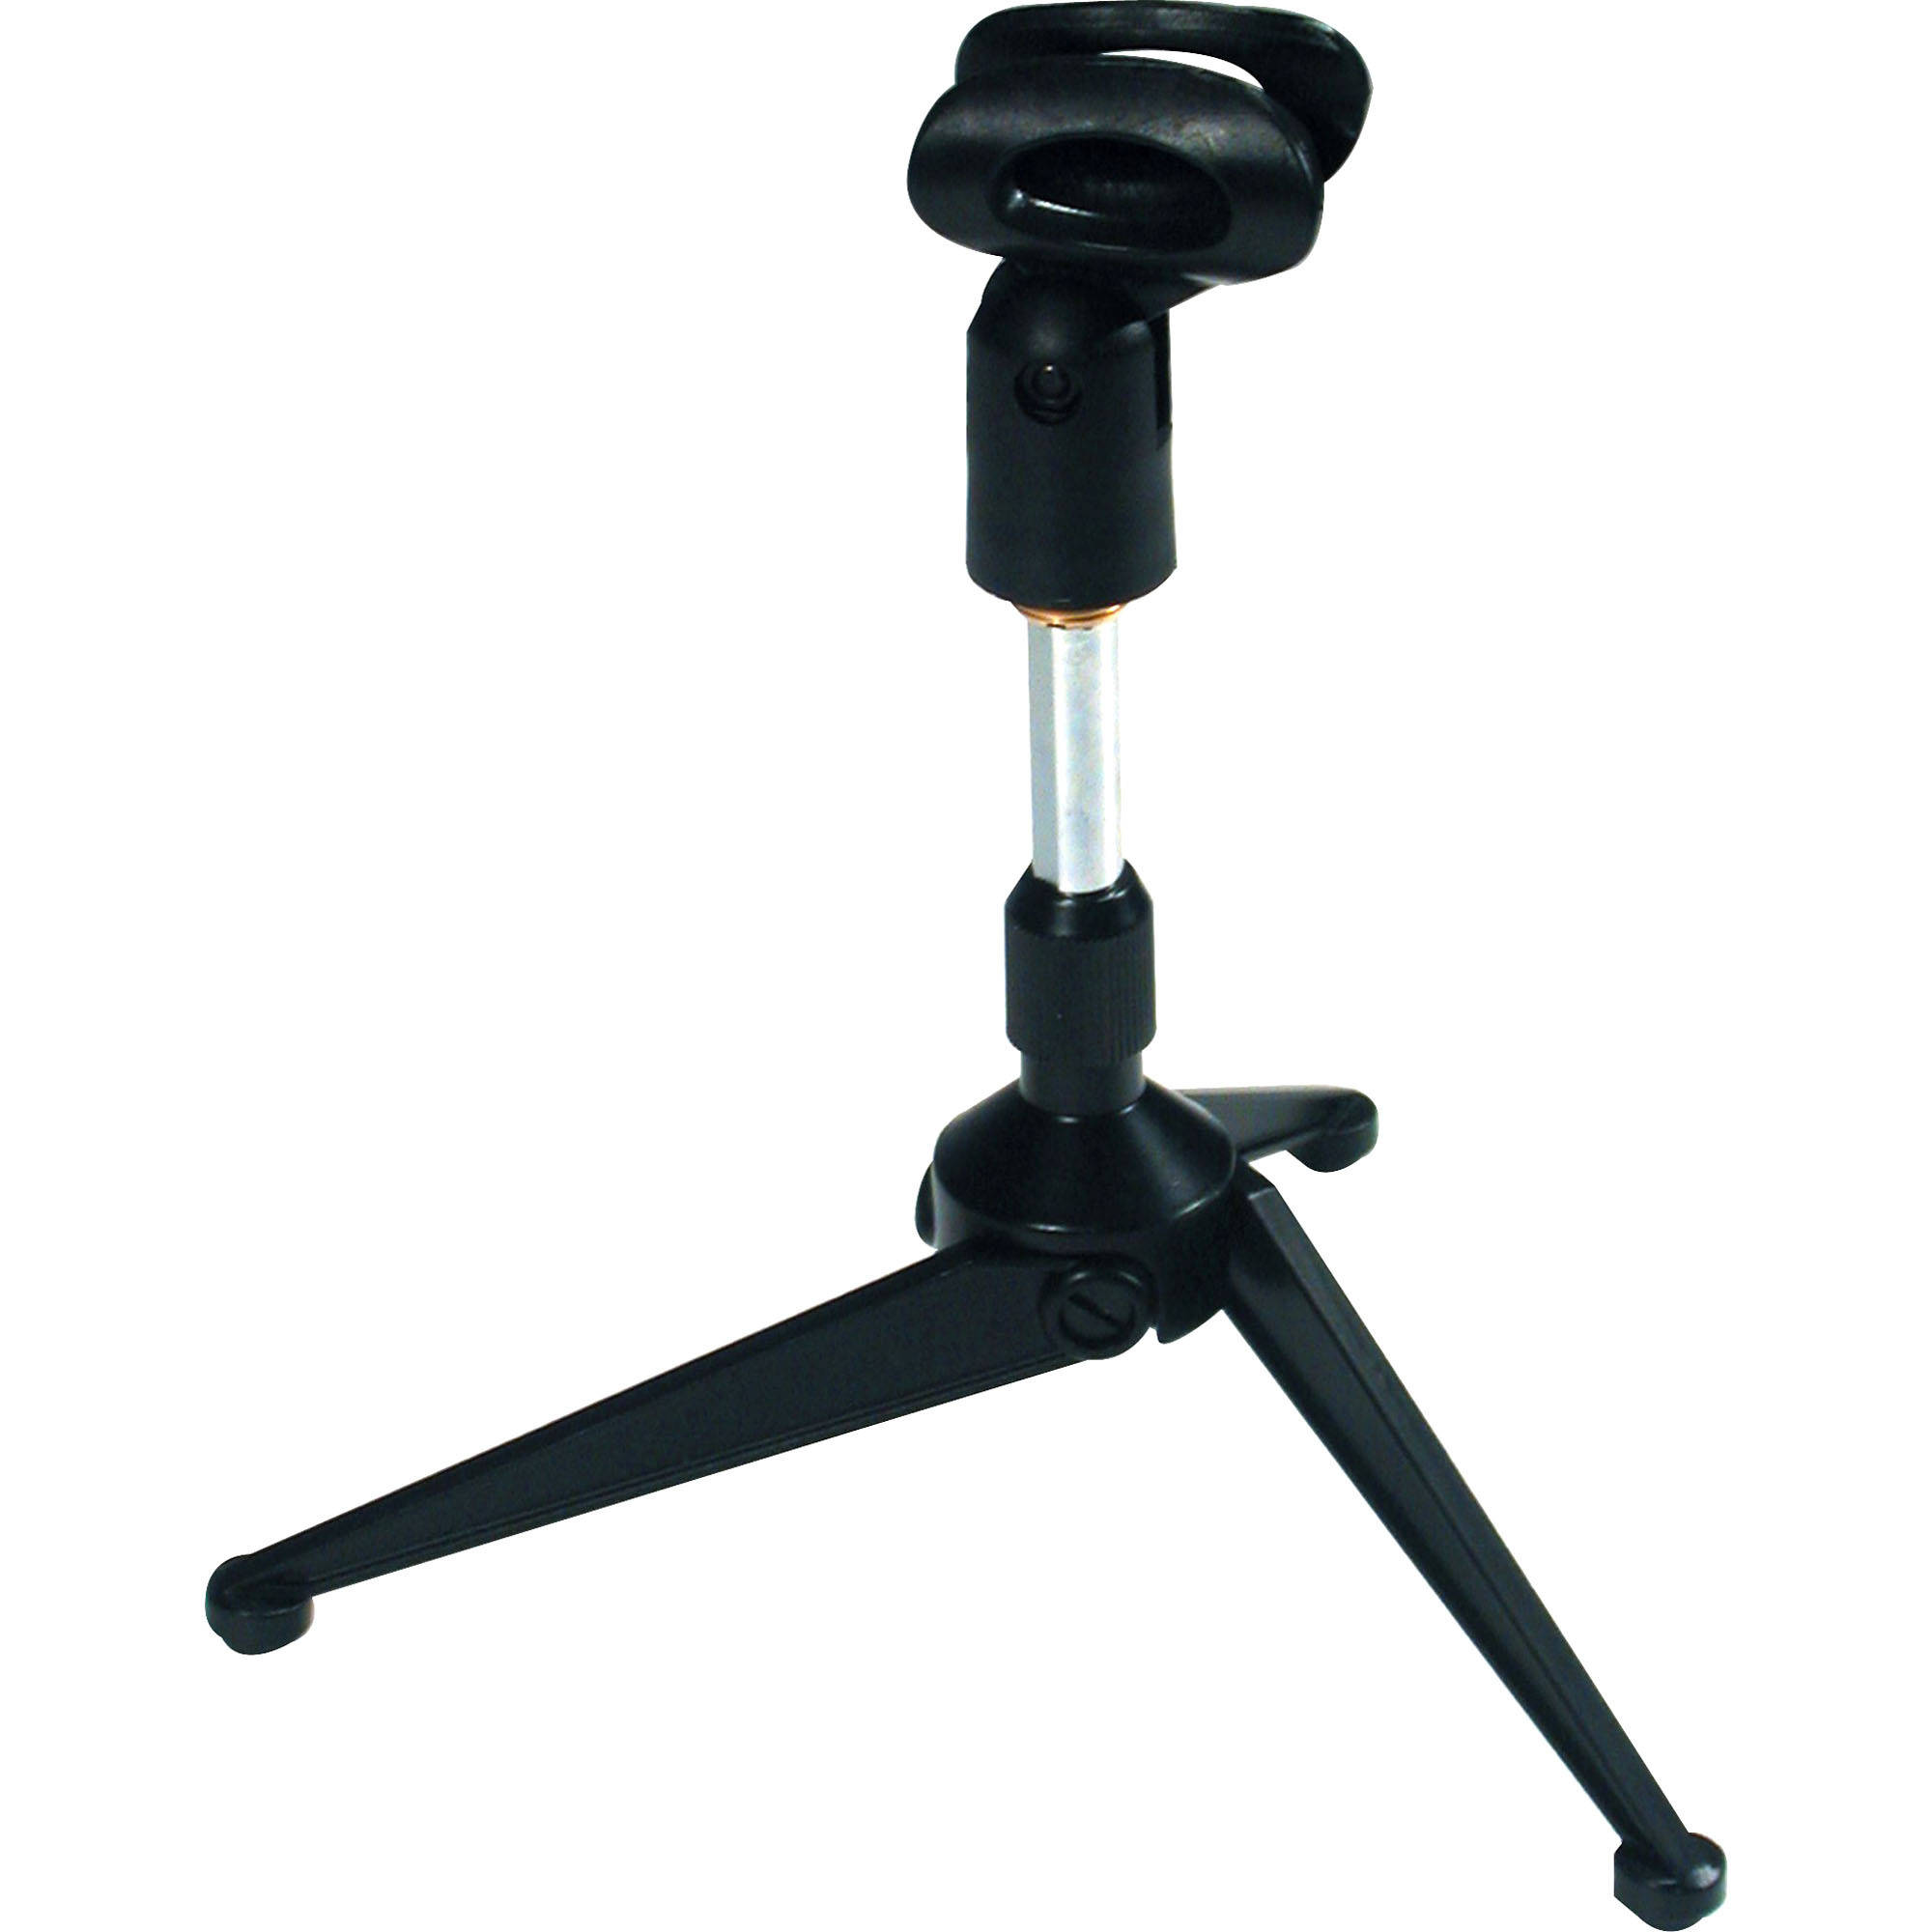 Adjustable Desktop Table Mic Microphone Clamp Clip Holder Stand Tripod For Shure